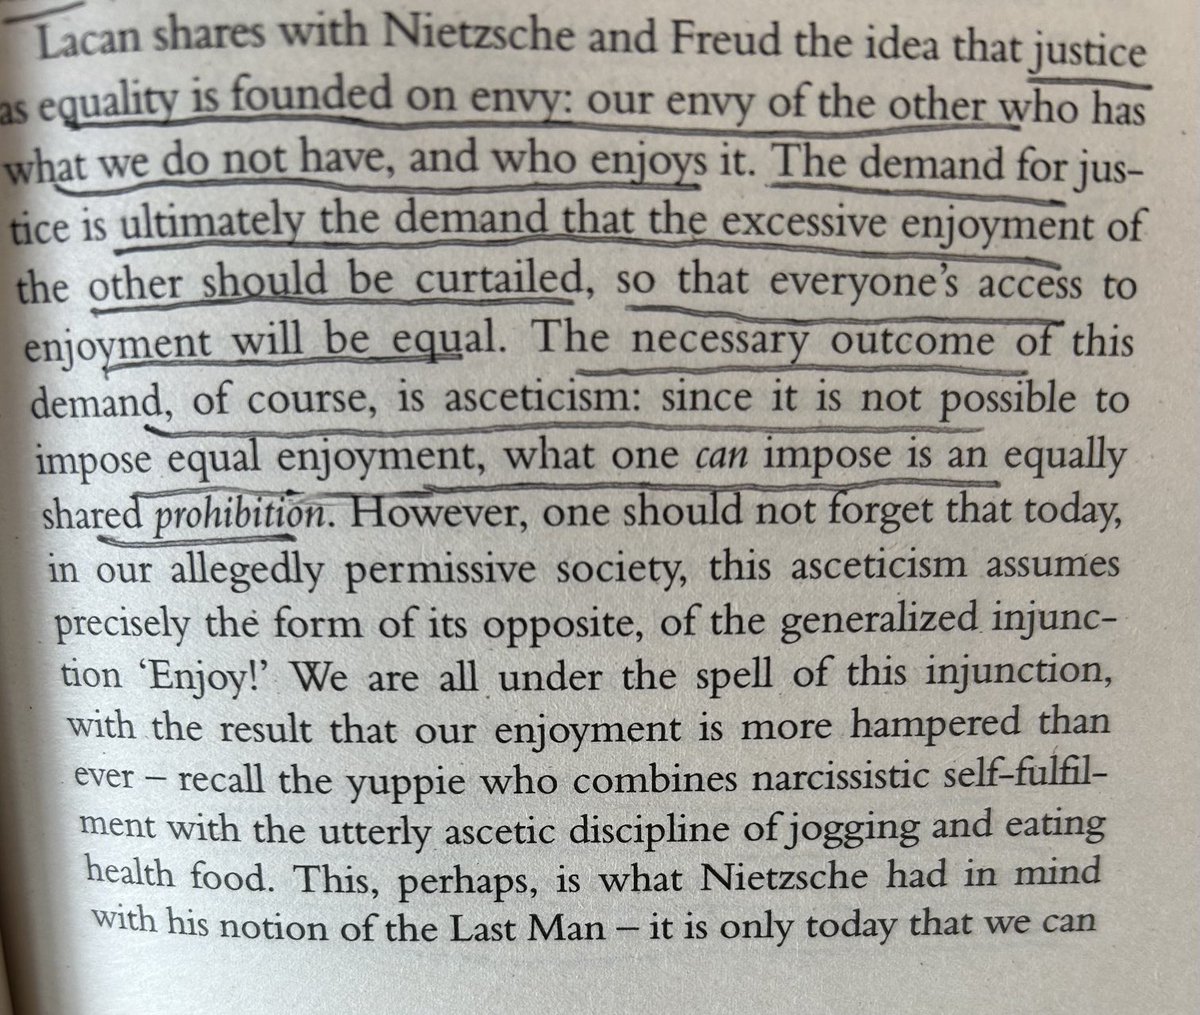 'justice as equality is founded on envy: our envy of the other who has what we do not have, and who enjoys it...The necessary outcome of this demand...since it is not possible to impose equal enjoyment, what one can impose is an equally shared prohibition' a.co/d/9dMCZIT